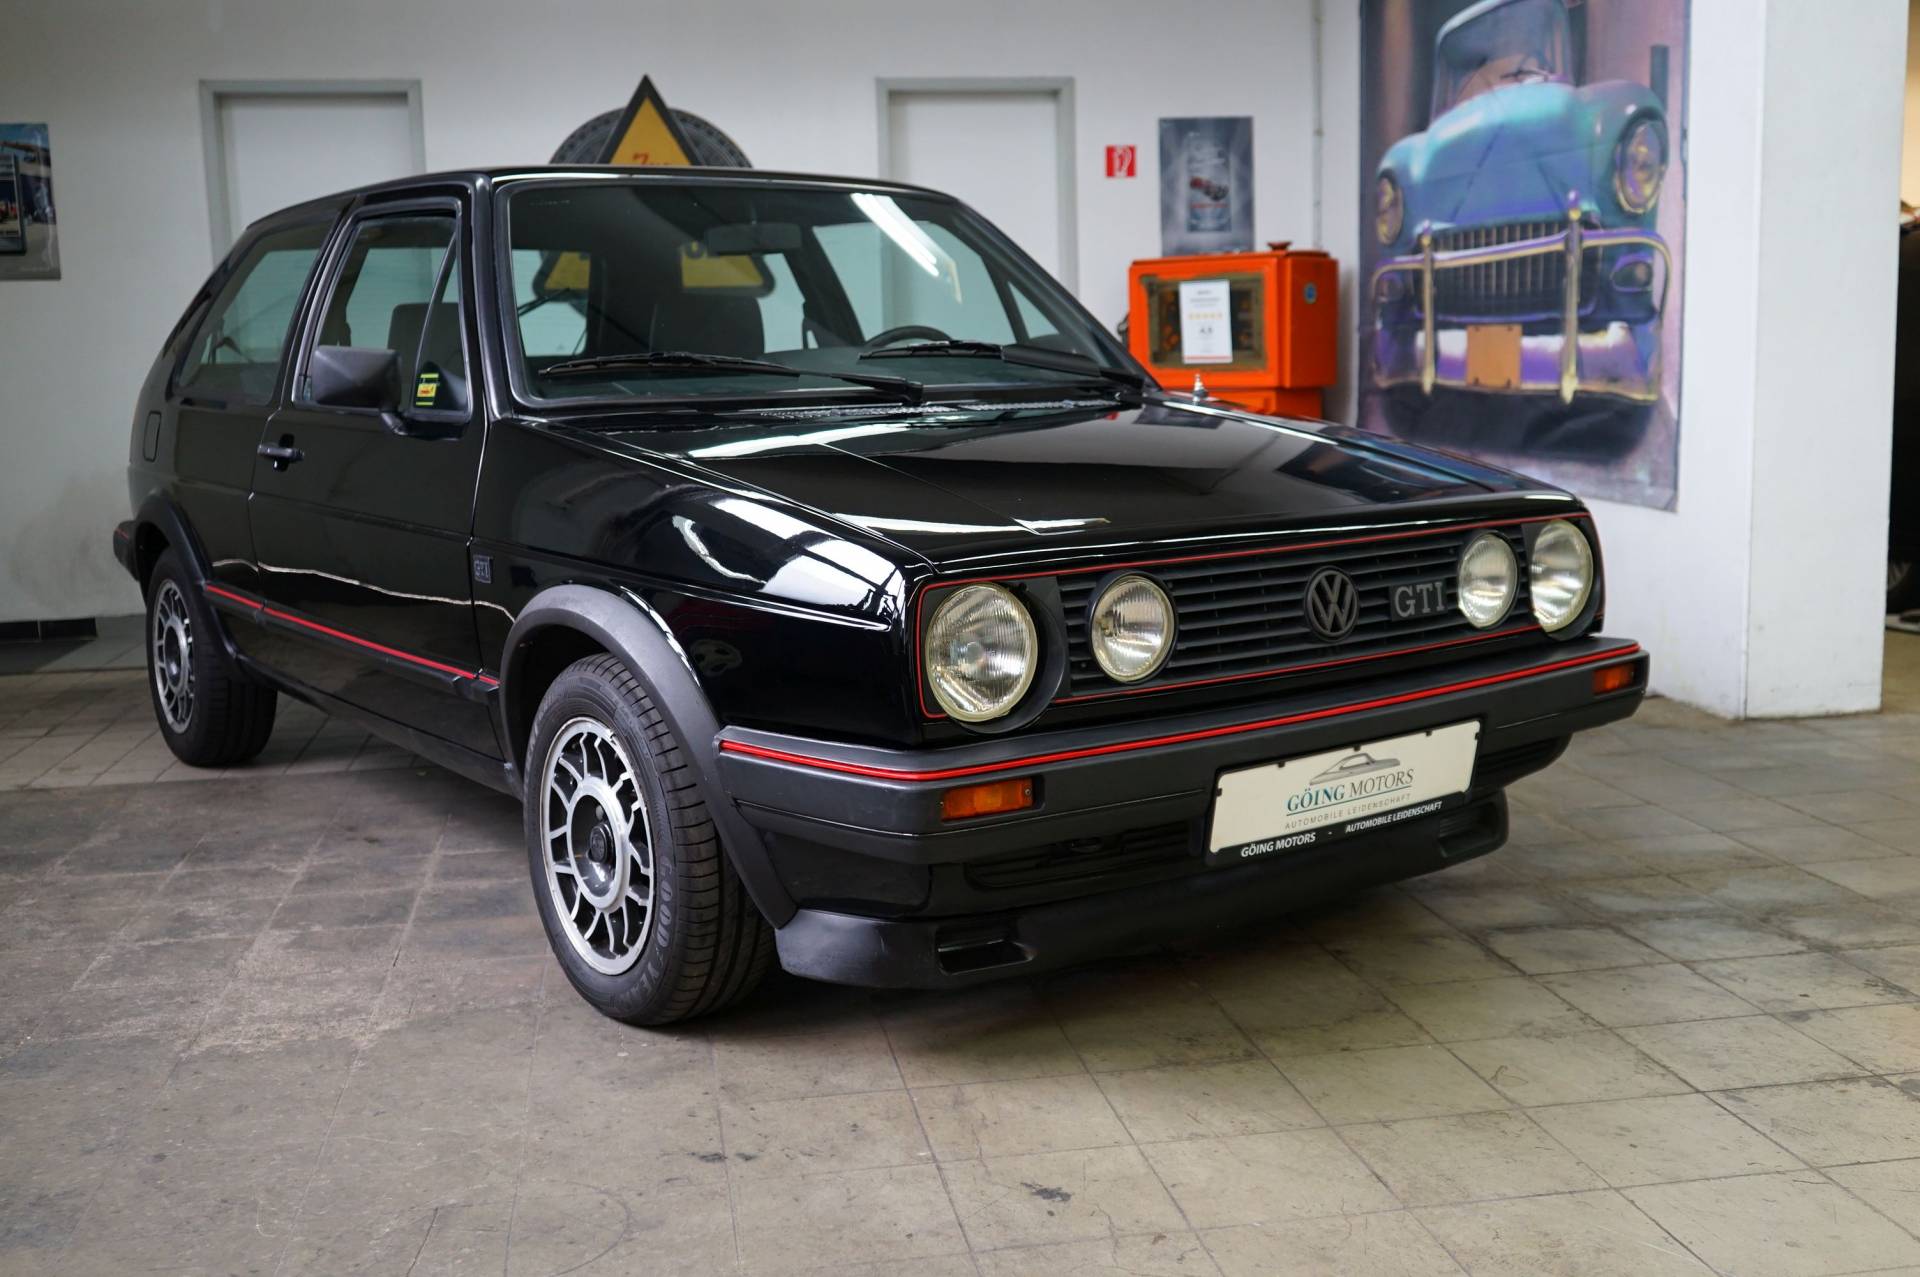 For Sale Volkswagen Golf Mk Ii Gti 1 8 1985 Offered For Gbp 10 972